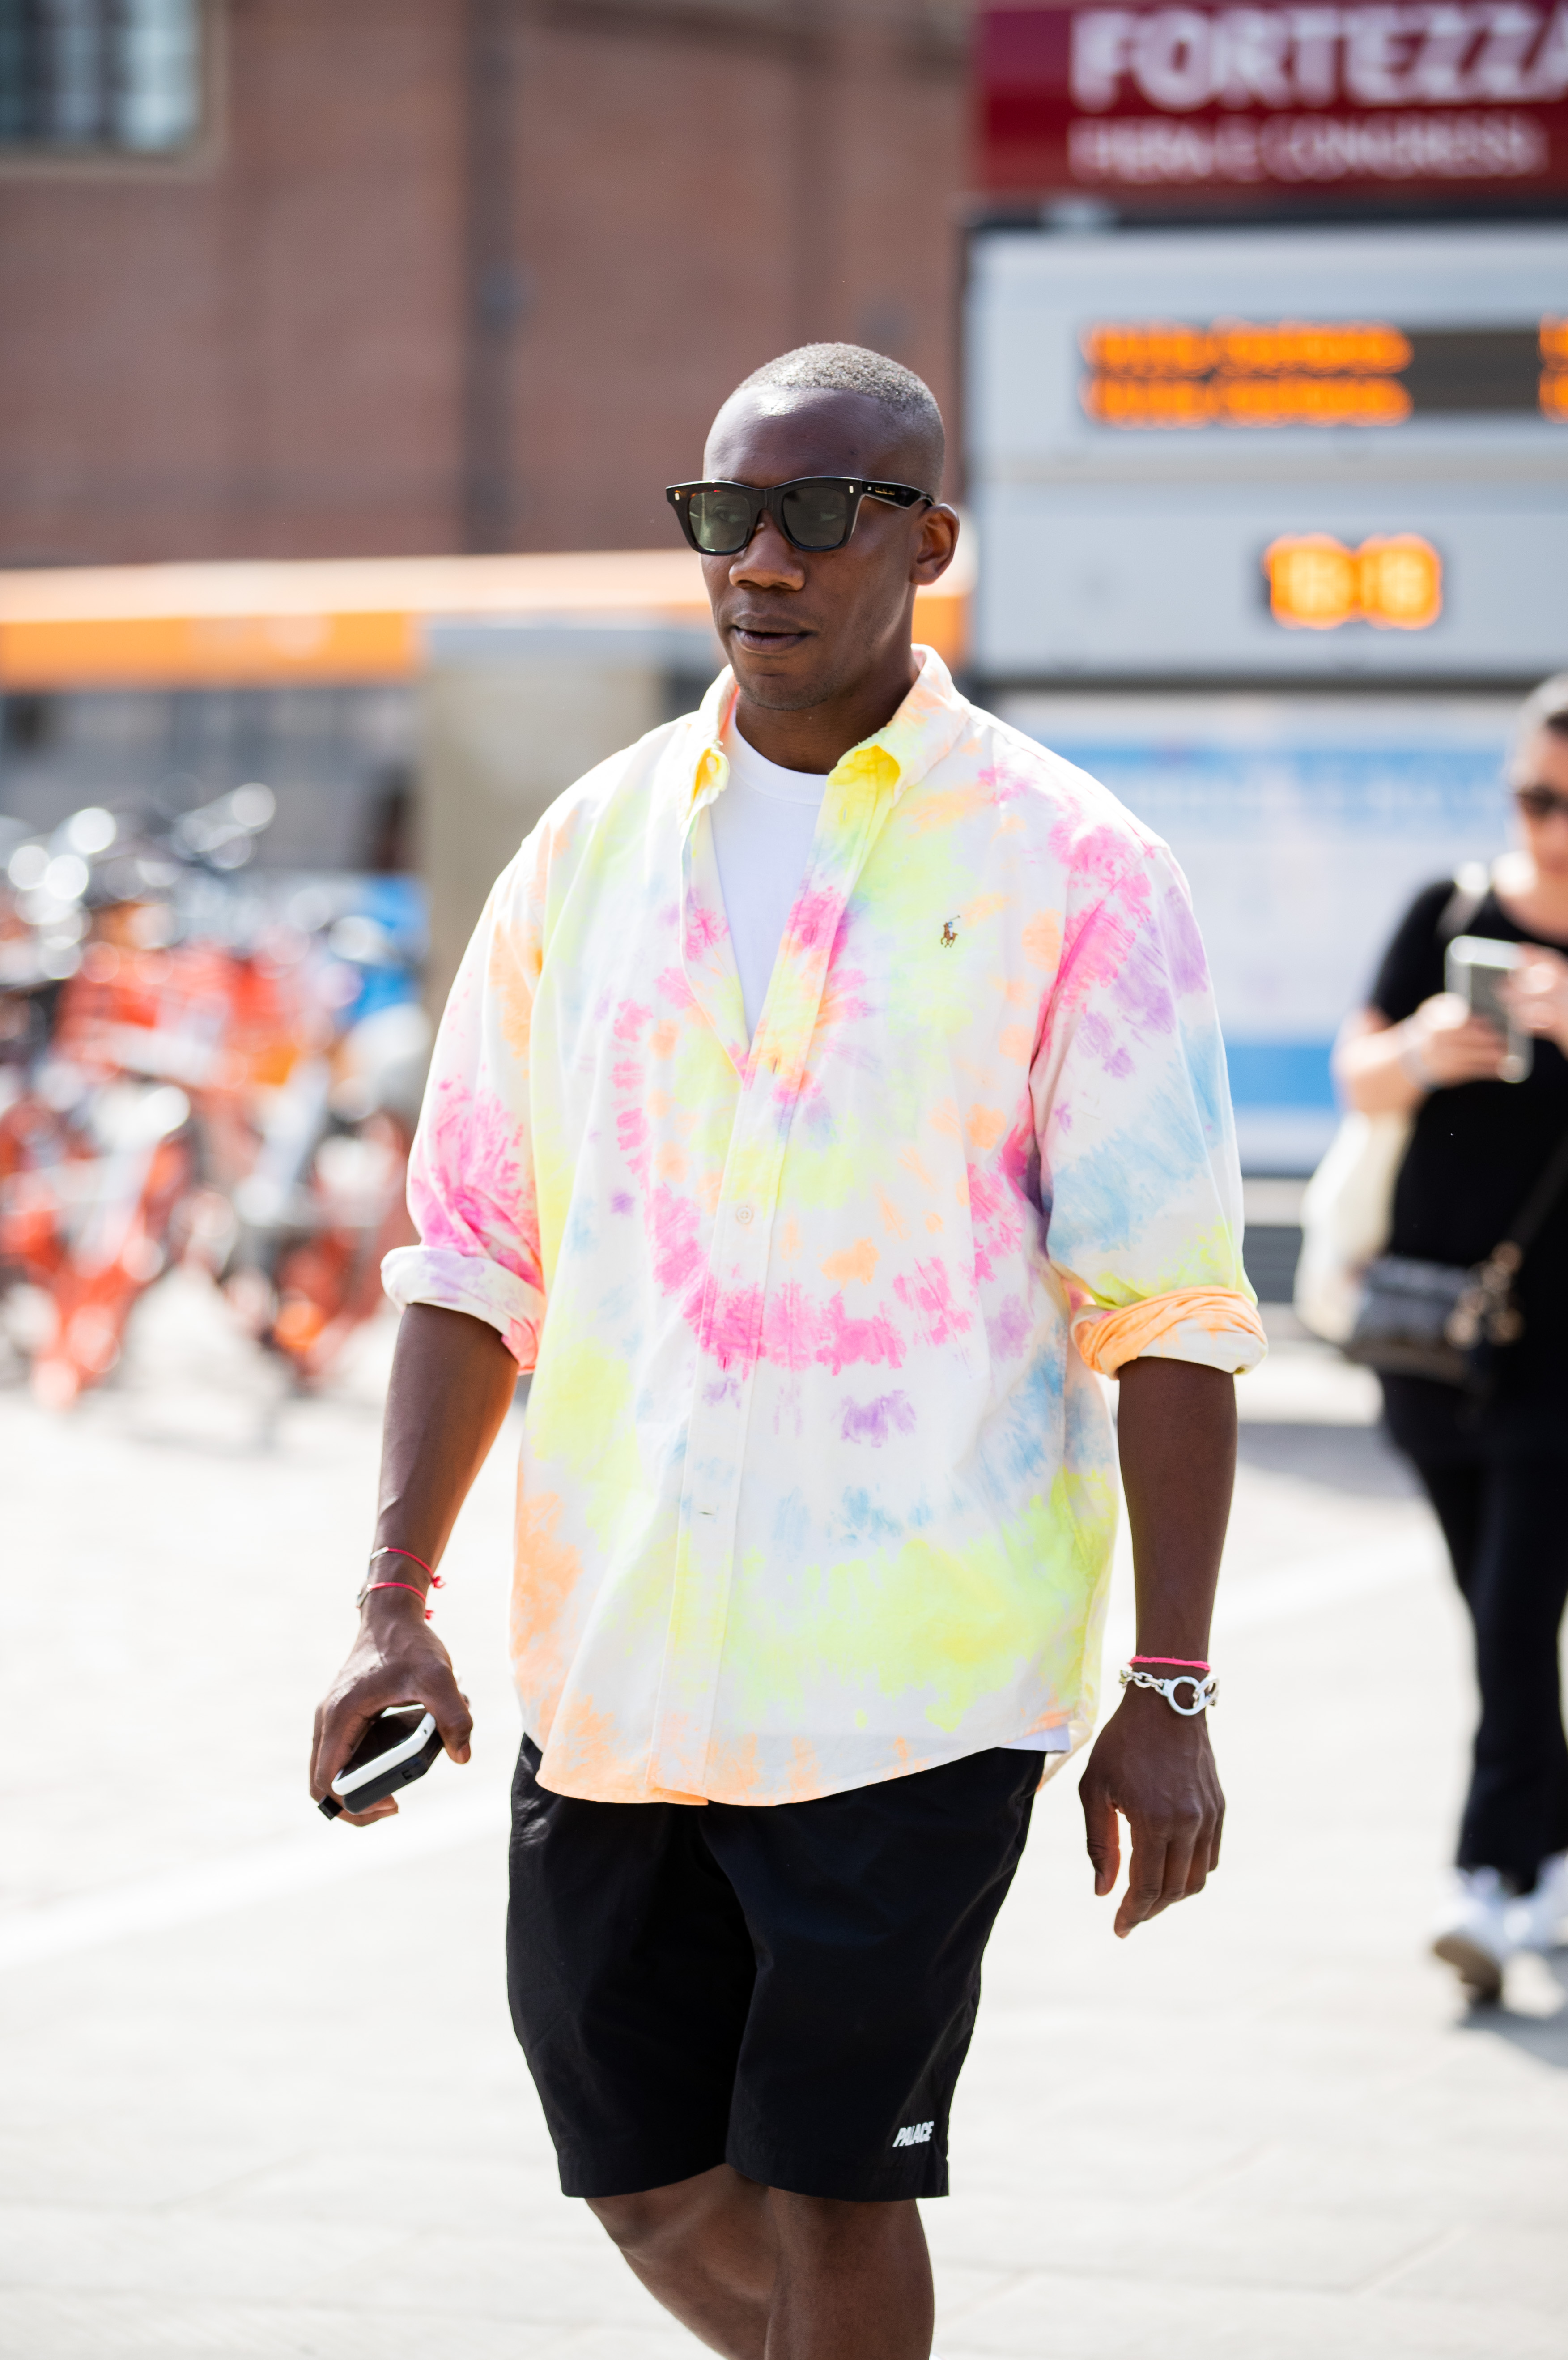 FLORENCE, ITALY - JUNE 12: A guest is seen wearing multi colored button shirt, black shorts during Pitti Immagine Uomo 96 on June 12, 2019 in Florence, Italy. (Photo by Christian Vierig/Getty Images)